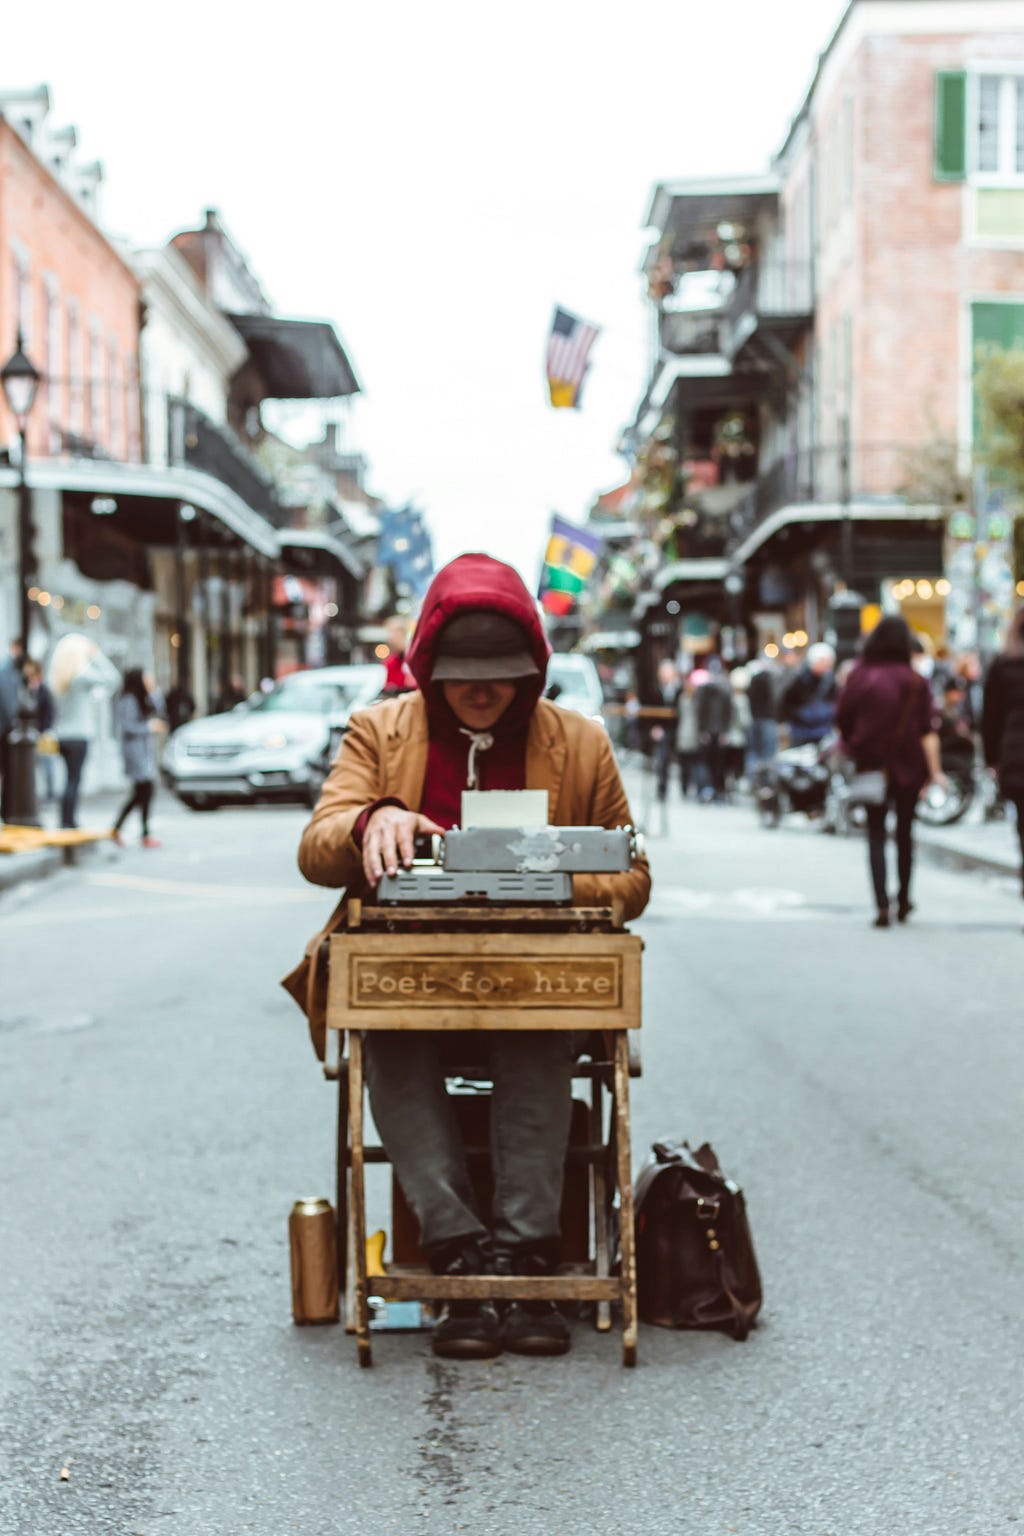 Photo of a person sitting in the middle of the street at a small wooden desk that says “Poet for hire” on the front. The person is using a typewriter that is on top of the desk.